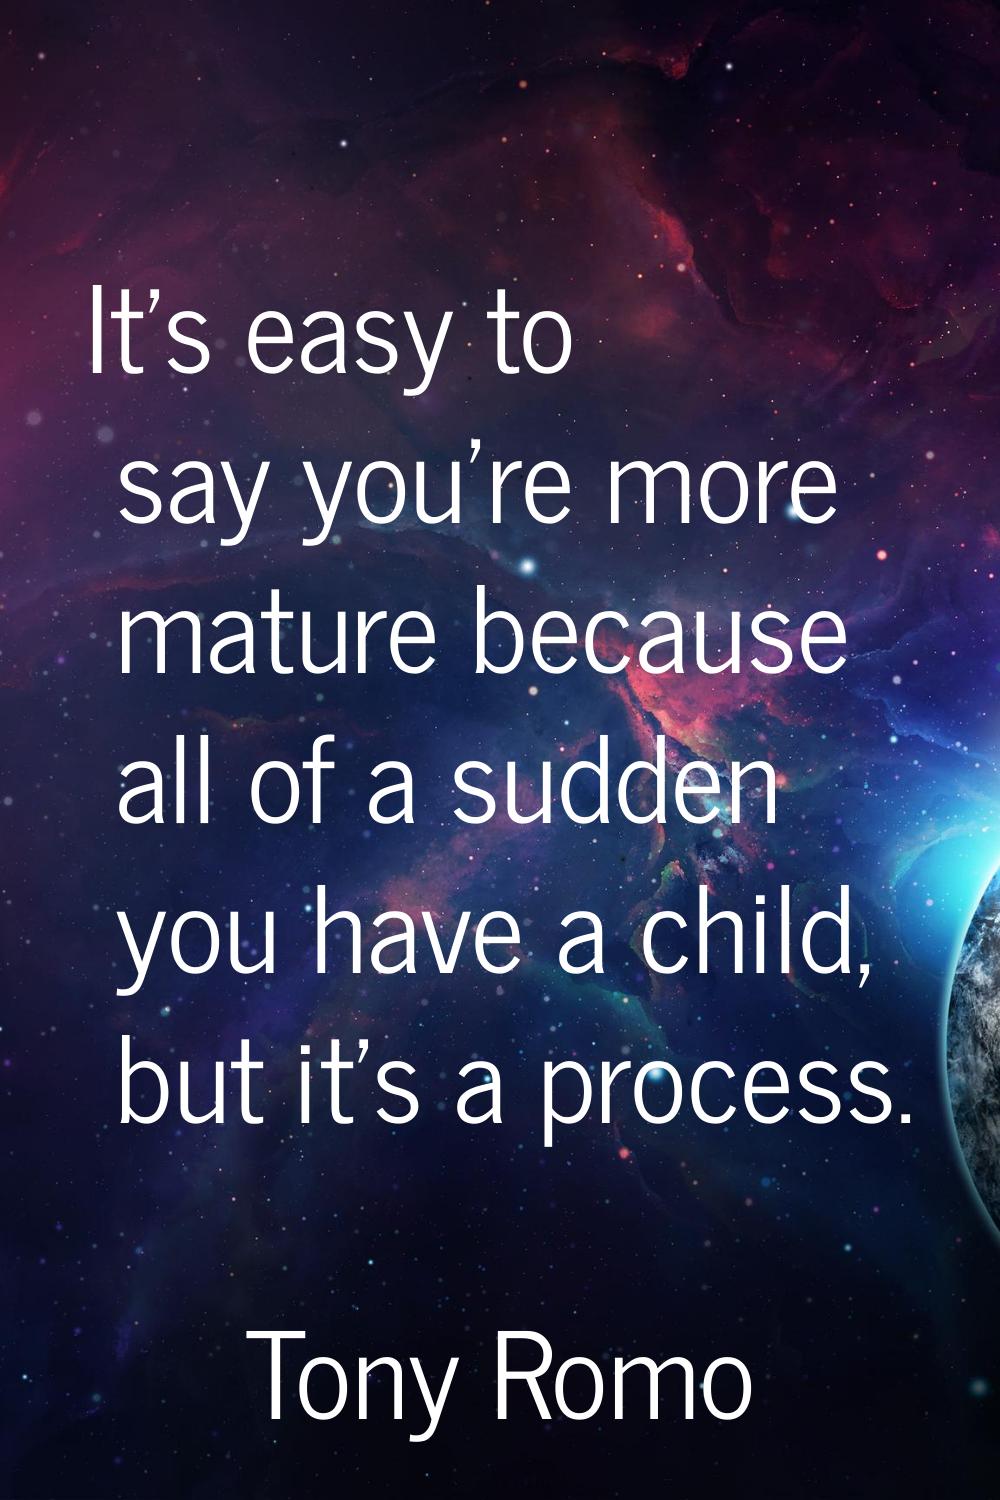 It's easy to say you're more mature because all of a sudden you have a child, but it's a process.